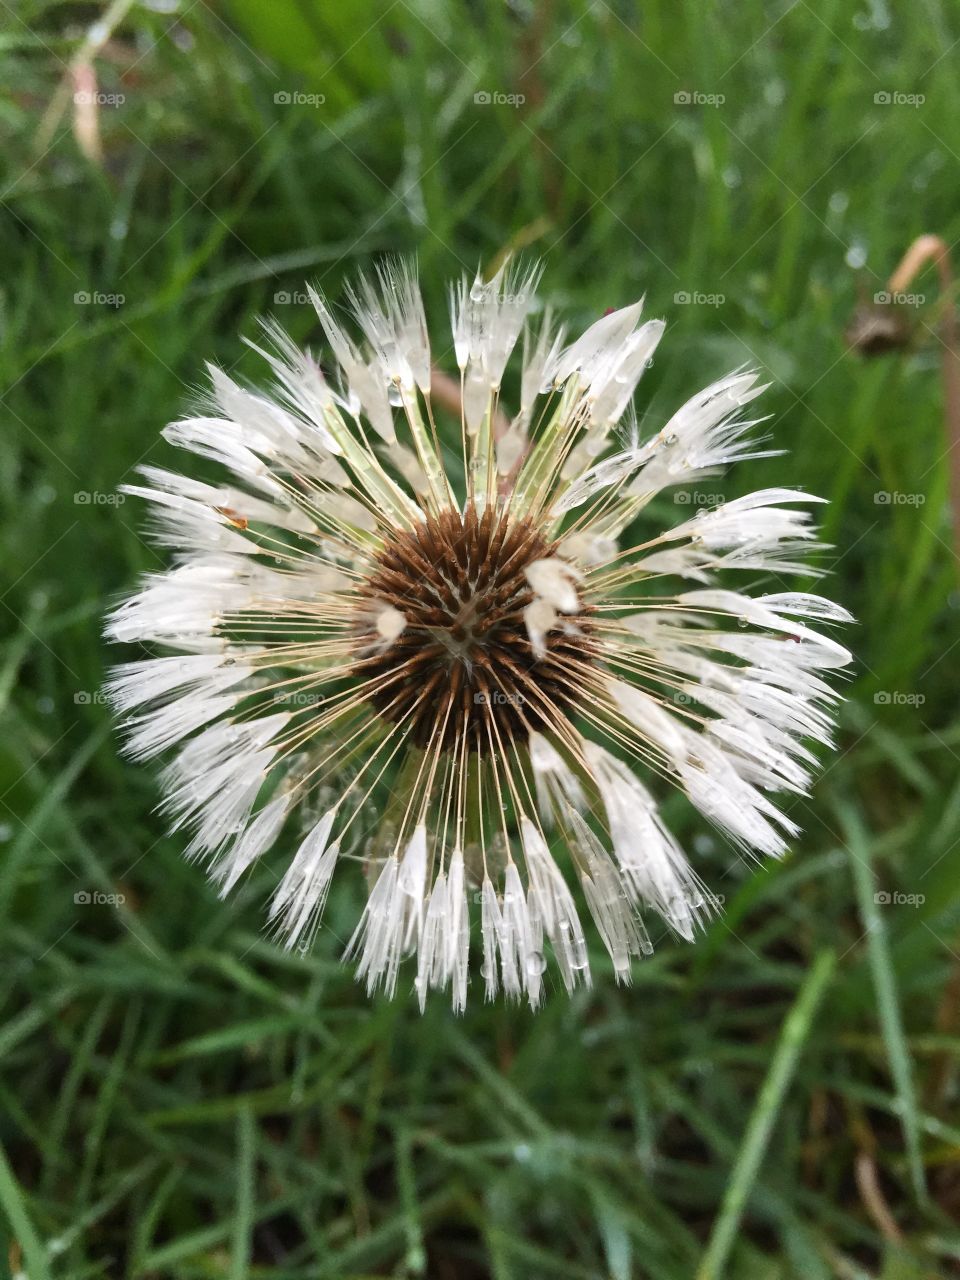 Weeds. Such beauty in a weed that can spread like wildfires 